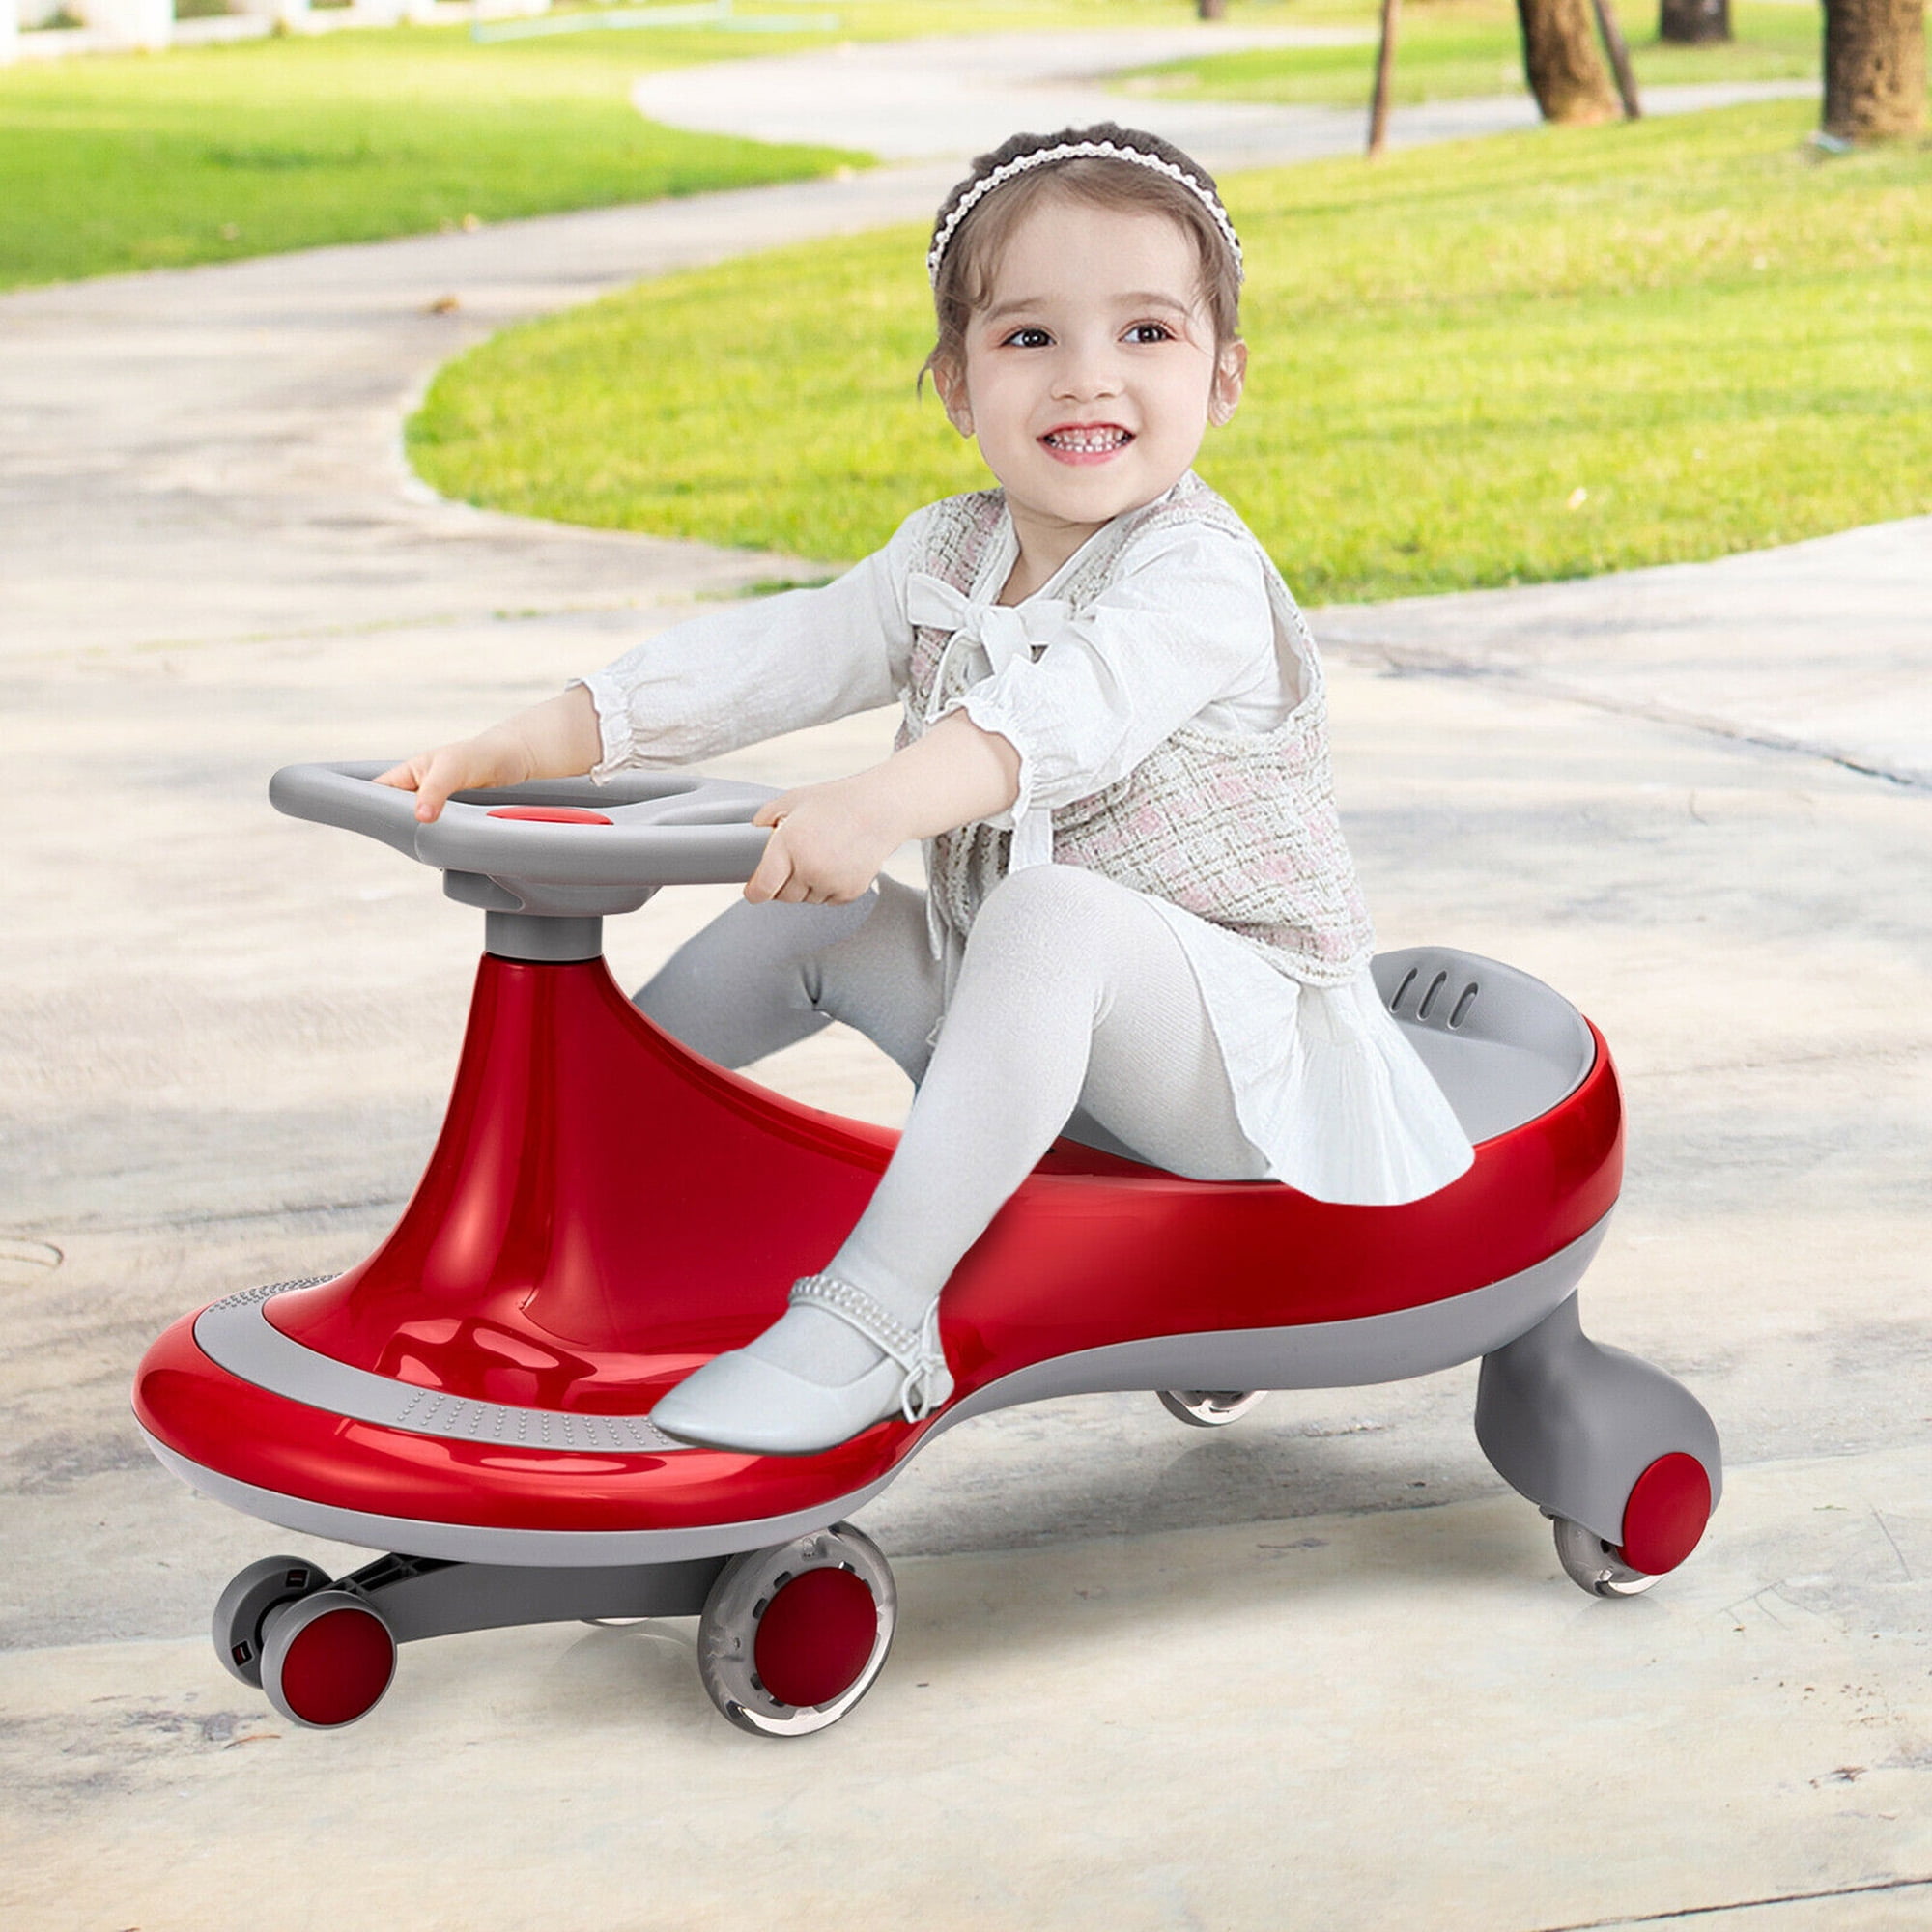 Kids Twist Ride on Toy Wiggle Car Ride on Car for Boys and Girls Gears Ages 3 Years and up for Toddlers Red or Pedals Turn 